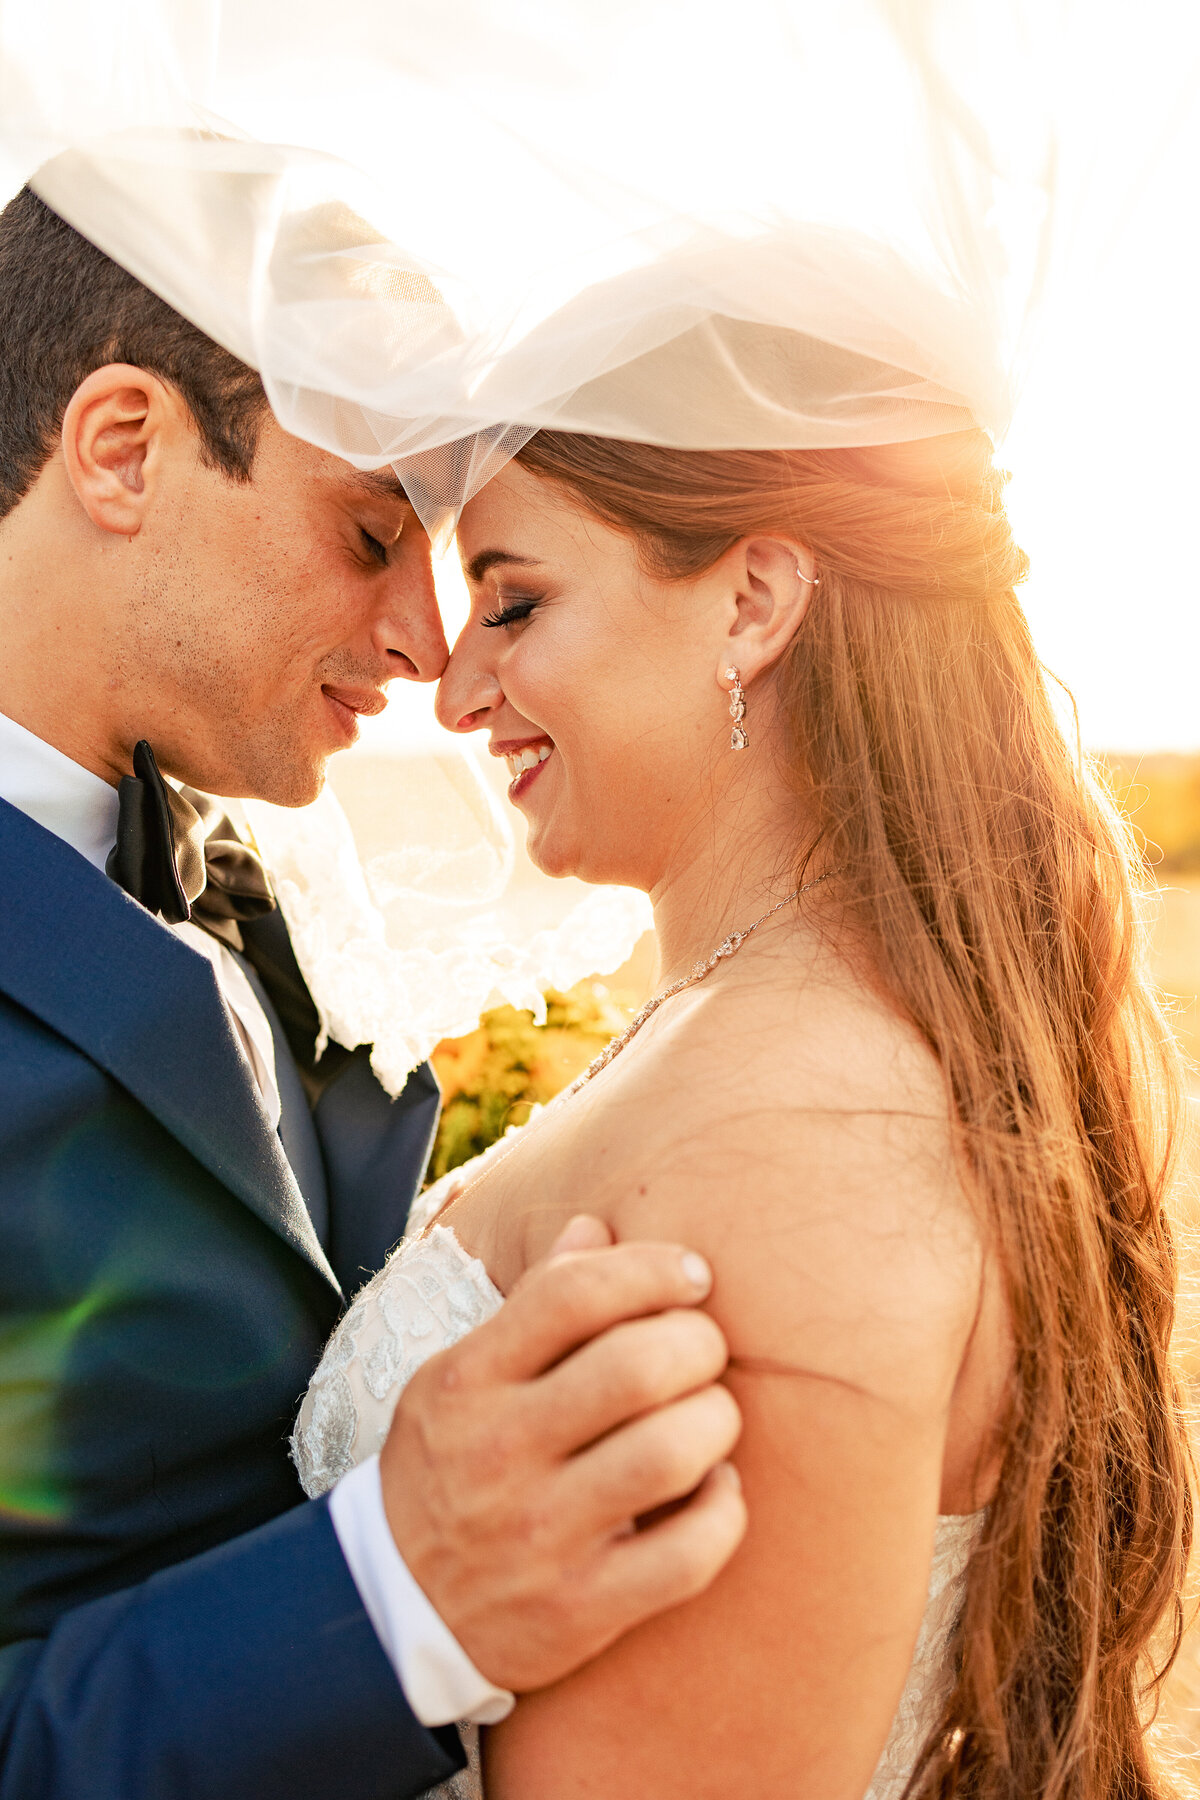 Join the love bash fiesta at Harper Hill Ranch. Sunflowers, open fields, an upbeat dance party, and poolside fun – your summer wedding extravaganza begins here.